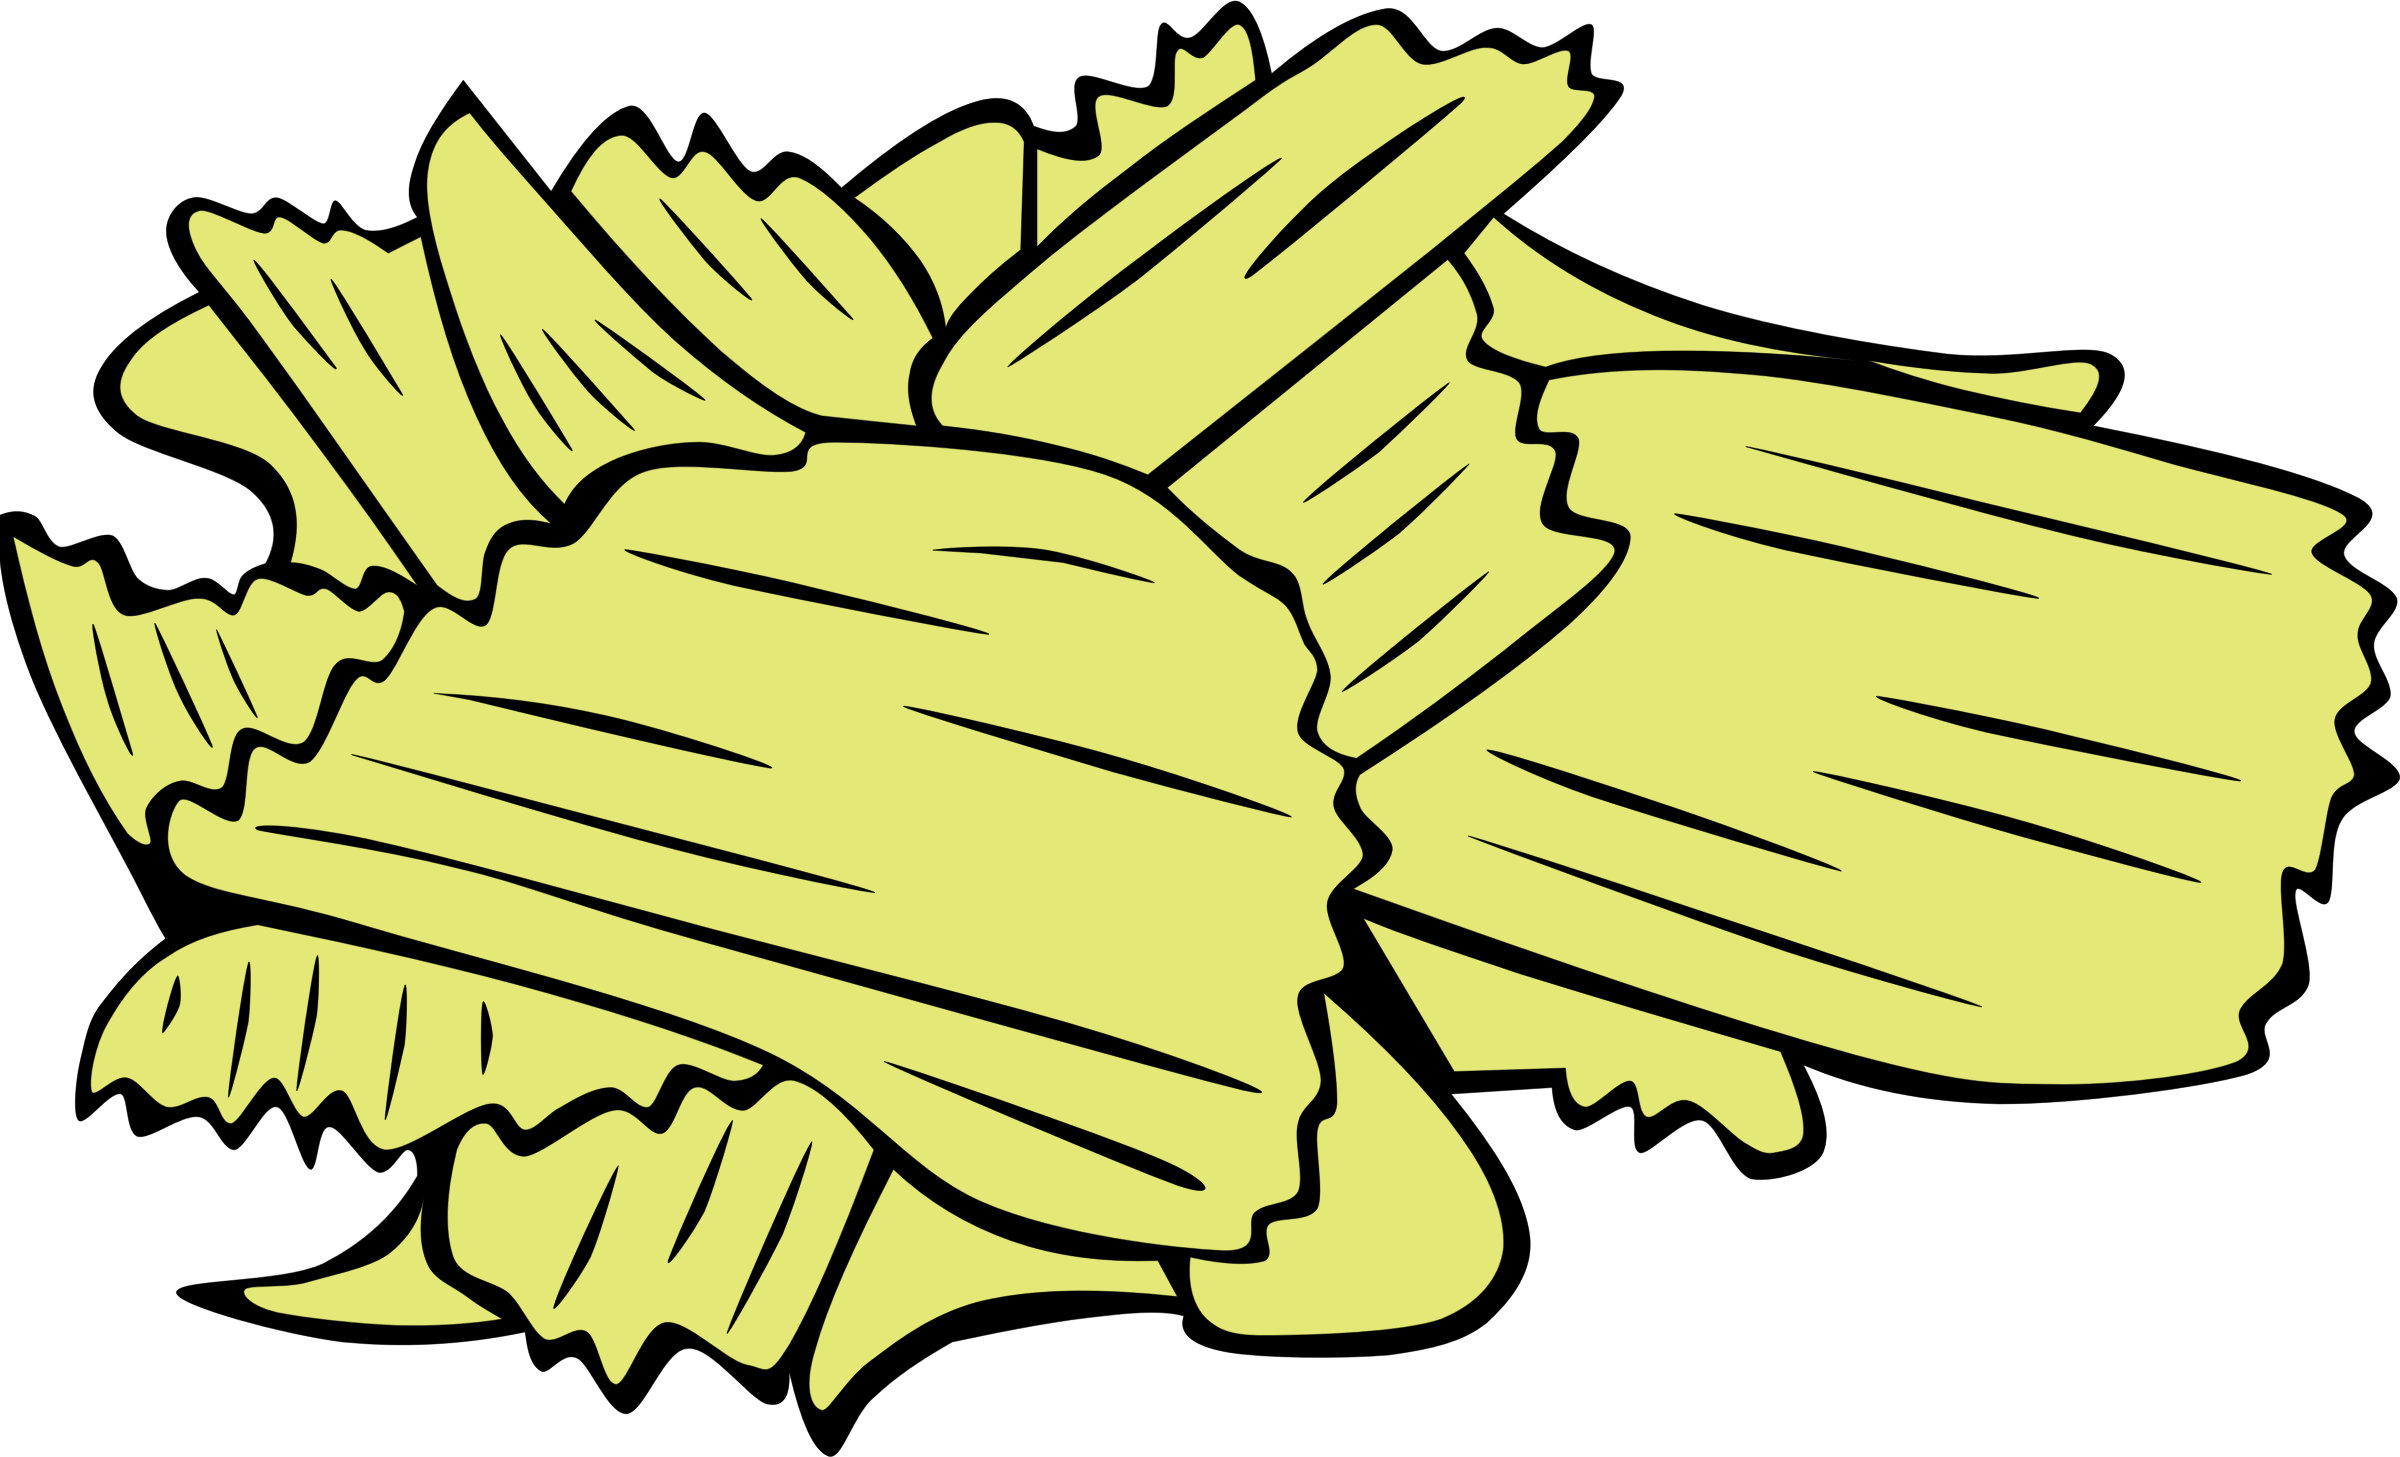 A Yellow And Black Drawing Of A Pile Of Shredded Food